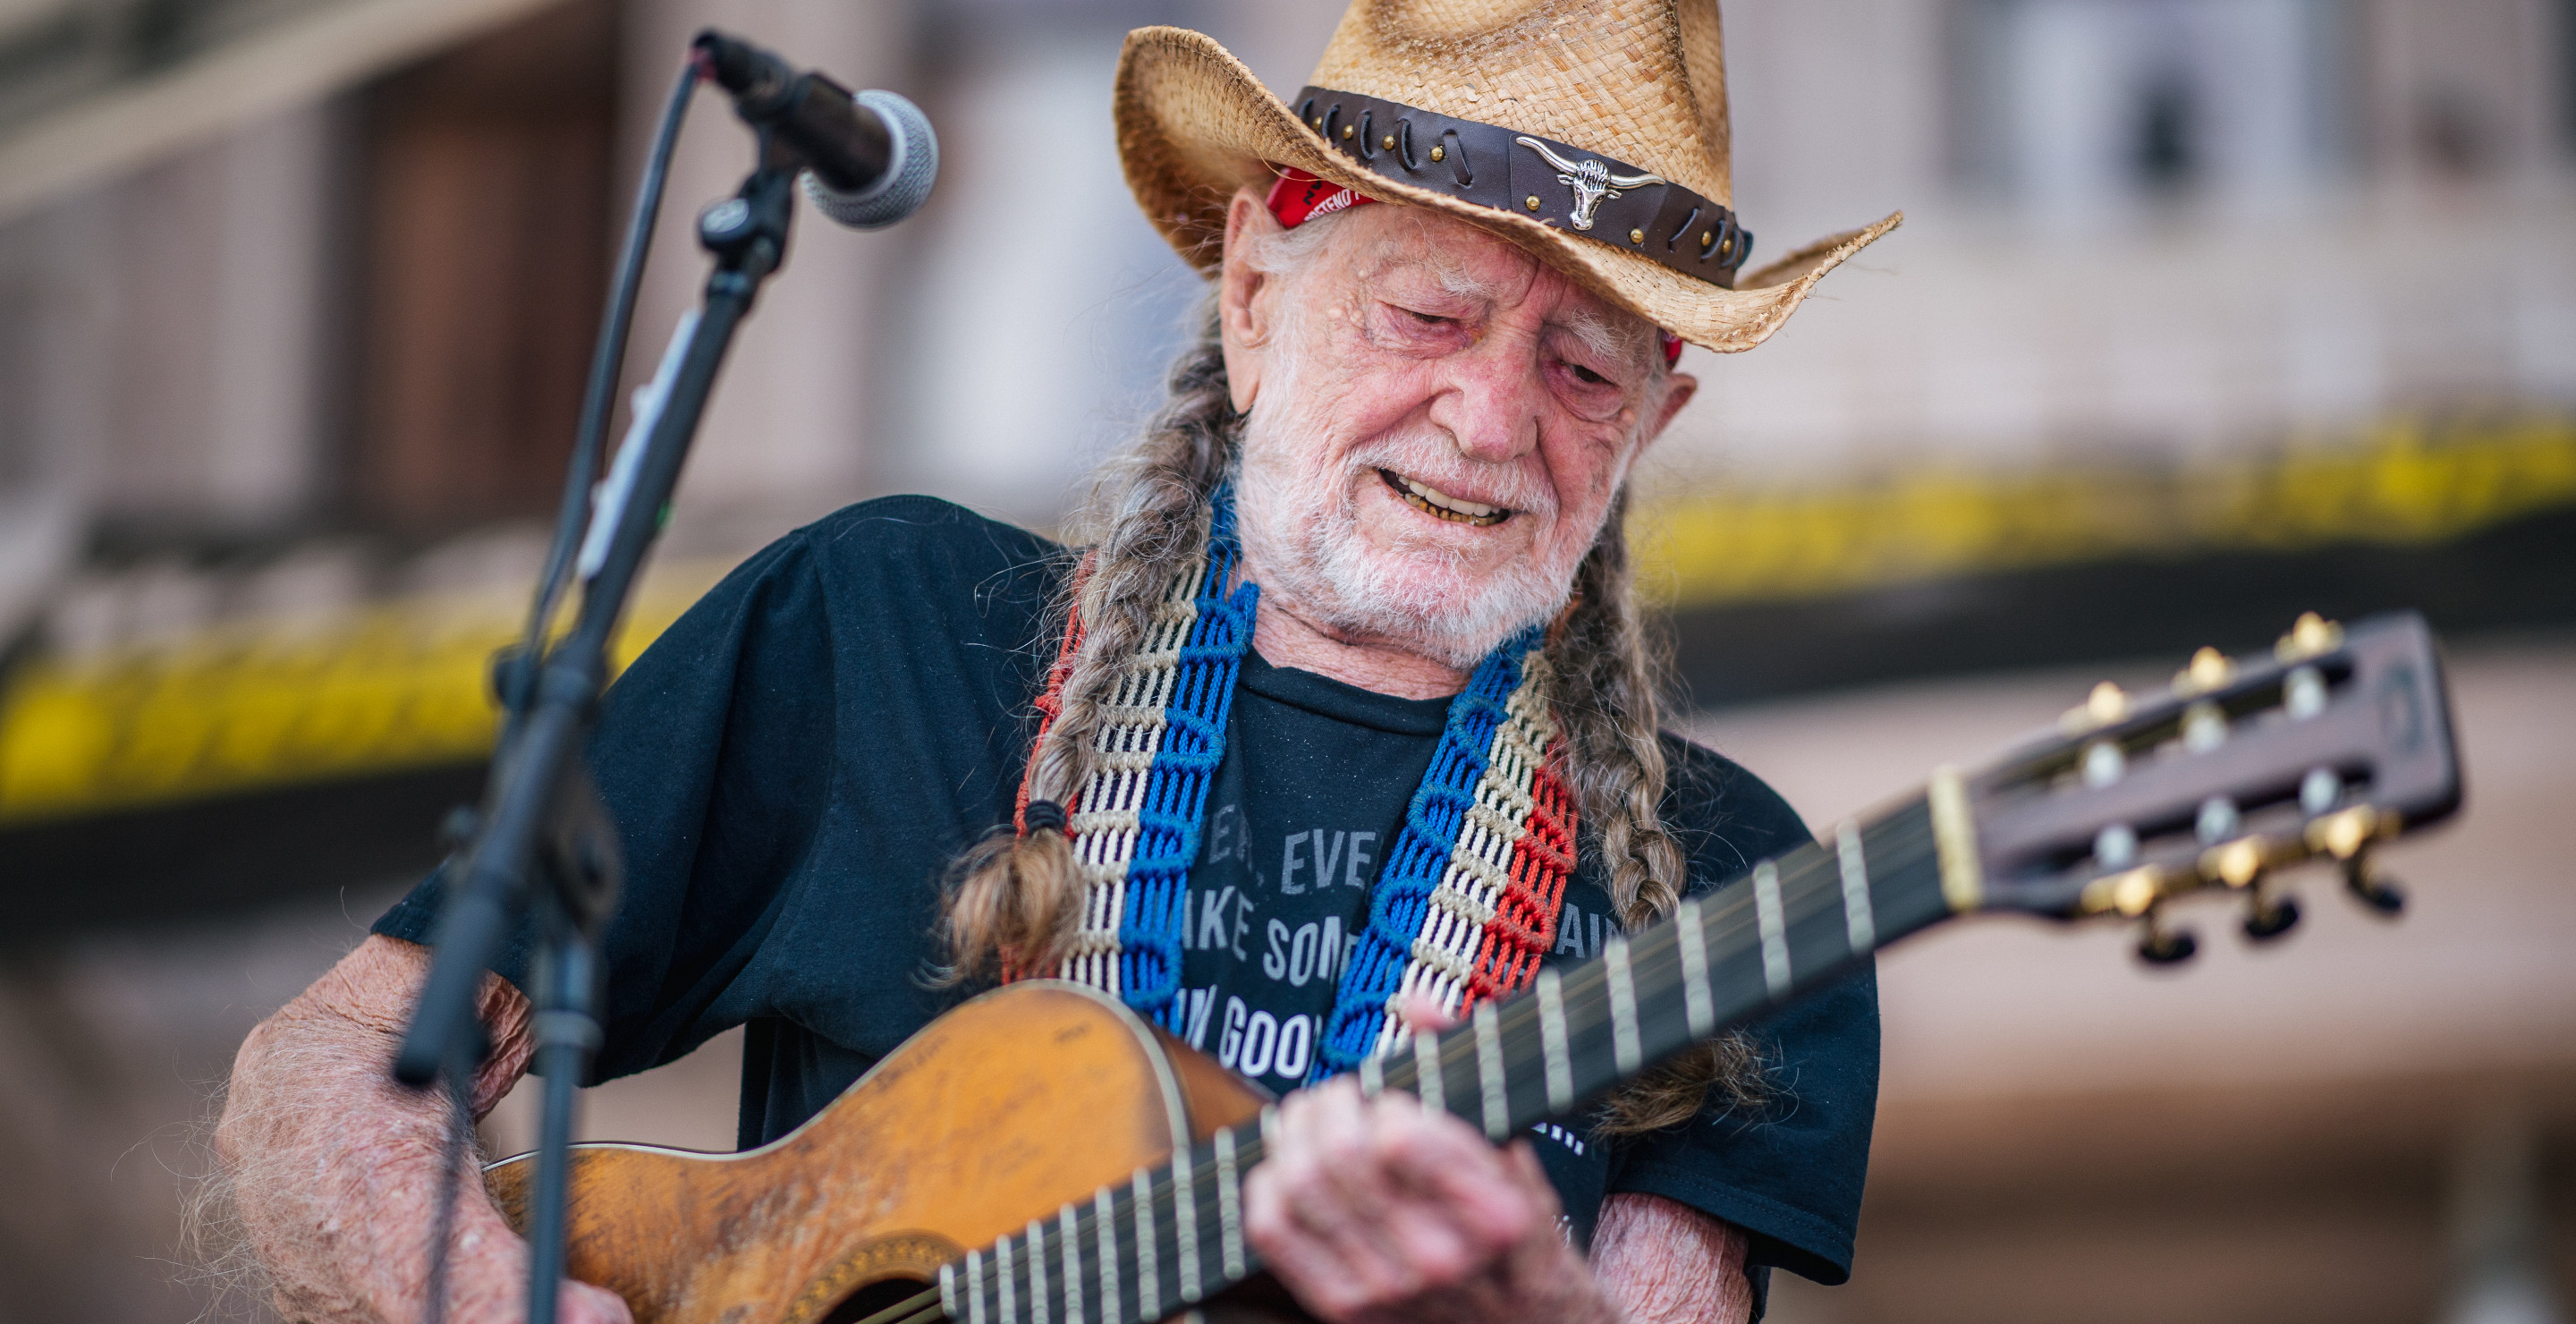 Willie Nelson fans are concerned after the singer cancels another concert due to illness